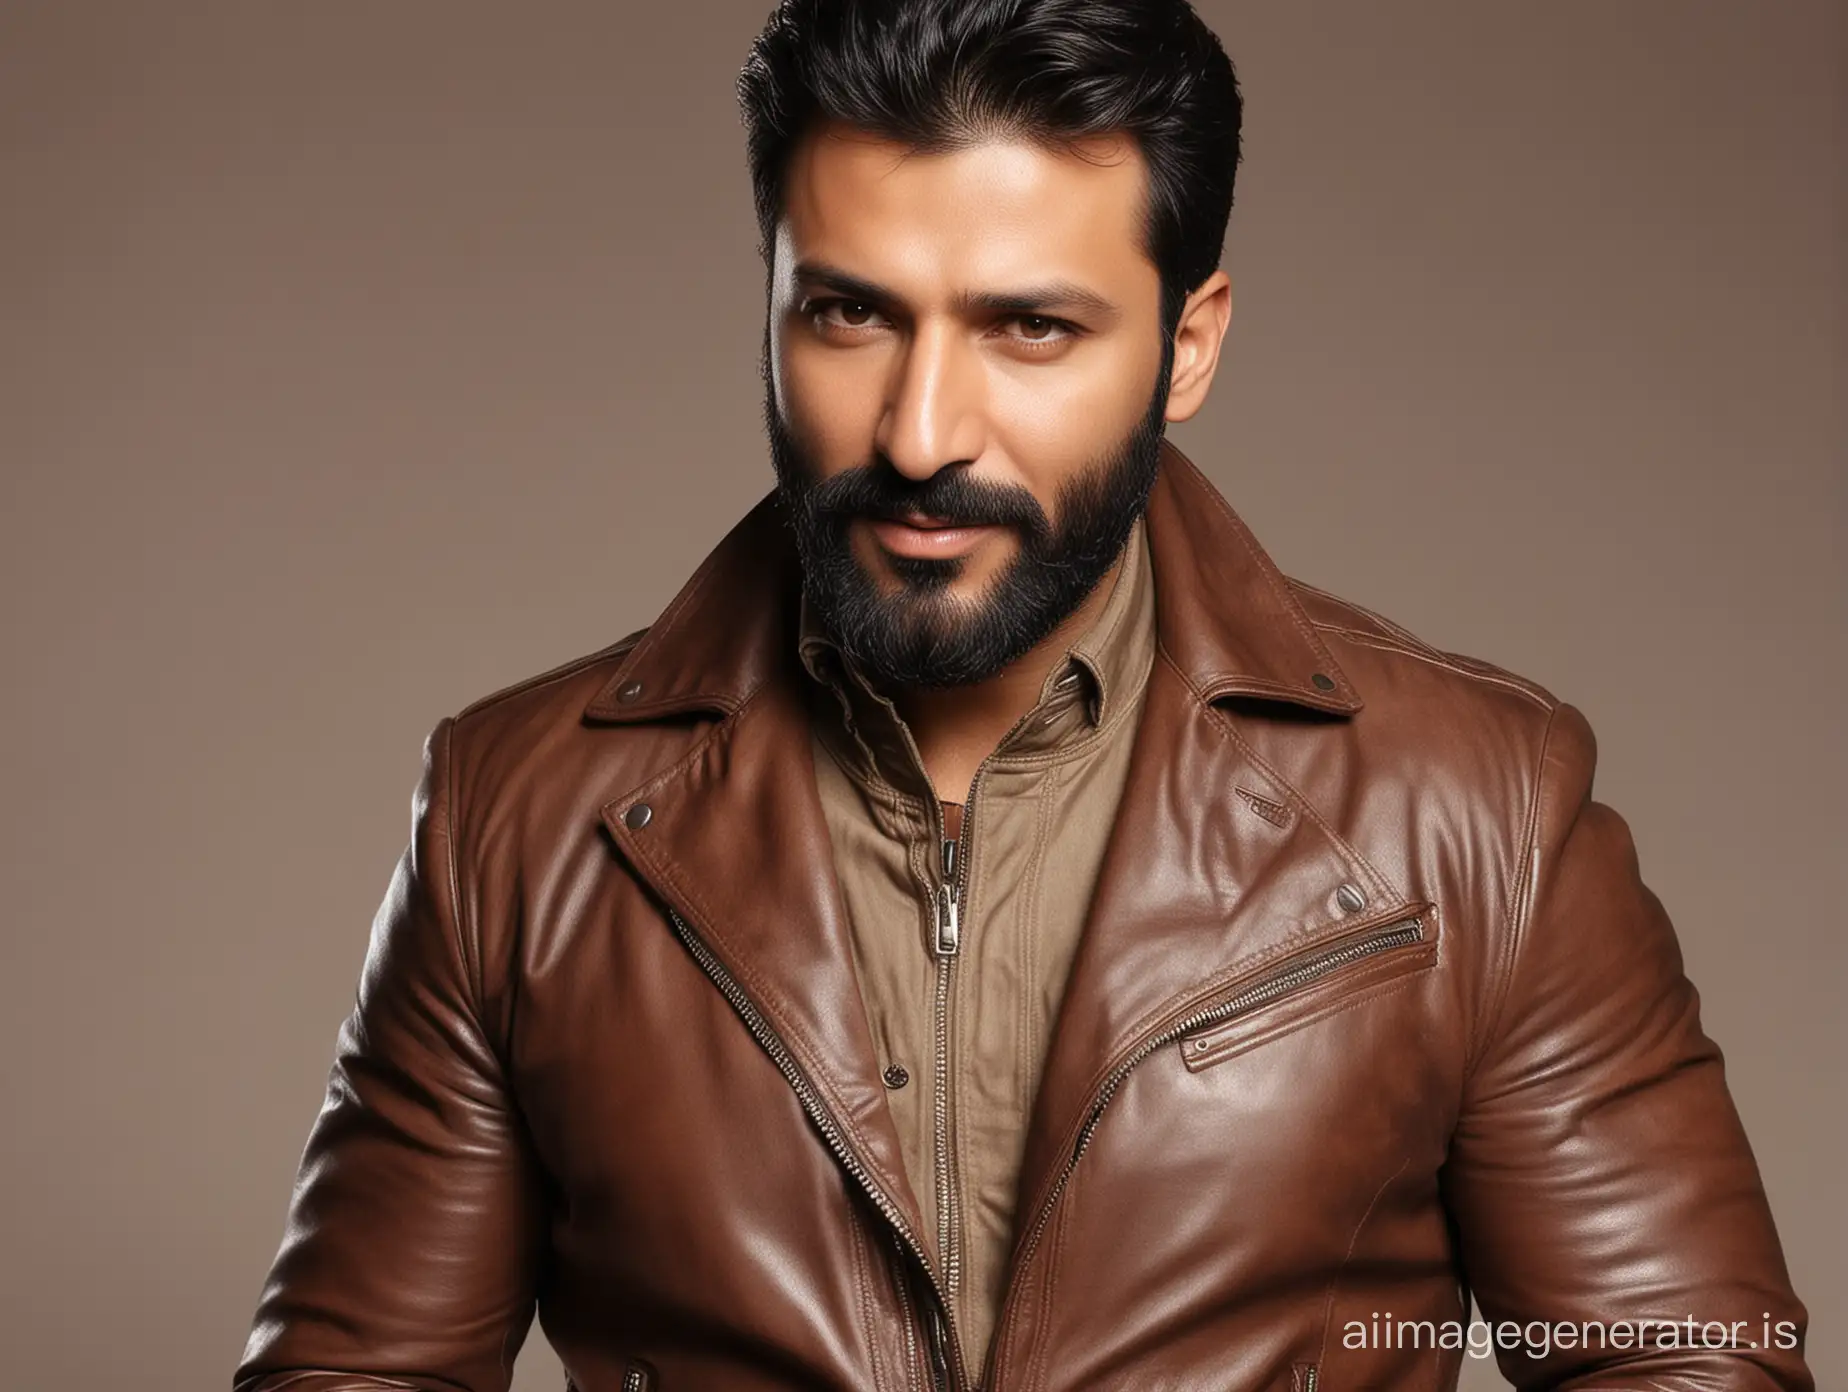 Aijaz-Aslam-Embracing-His-Fuller-Beard-in-a-Stylish-Brown-Leather-Jacket